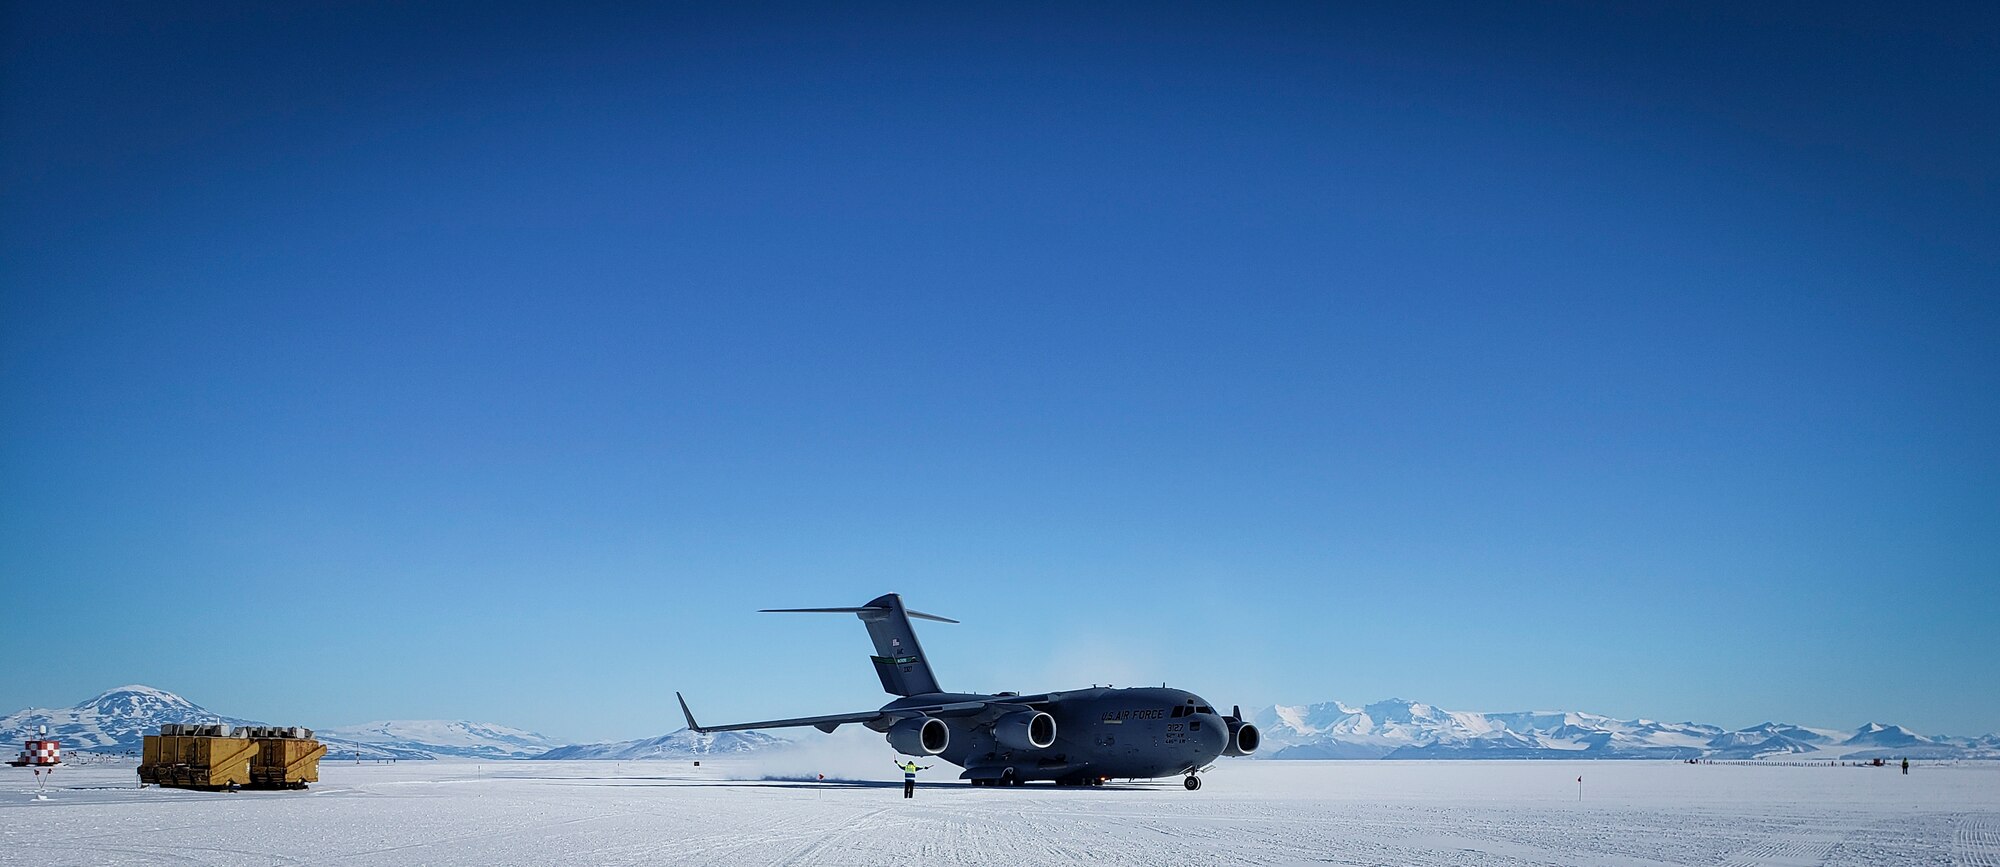 U.S. Air Force Master Sgt. Justin Rogers, an occupational safety specialist, 108th Wing, New Jersey Air National Guard, watches as a C-17 Globemaster arrives at McMurdo Station, Antarctica, Nov. 15, 2019.  Antarctica does not have a military mission, but the National Science Foundation receives airlift support from the 109th Airlift Wing, New York Air National Guard.Rogers backfilled as the 109th Safety Manager while at McMurdo Station. (Courtesy Photo)